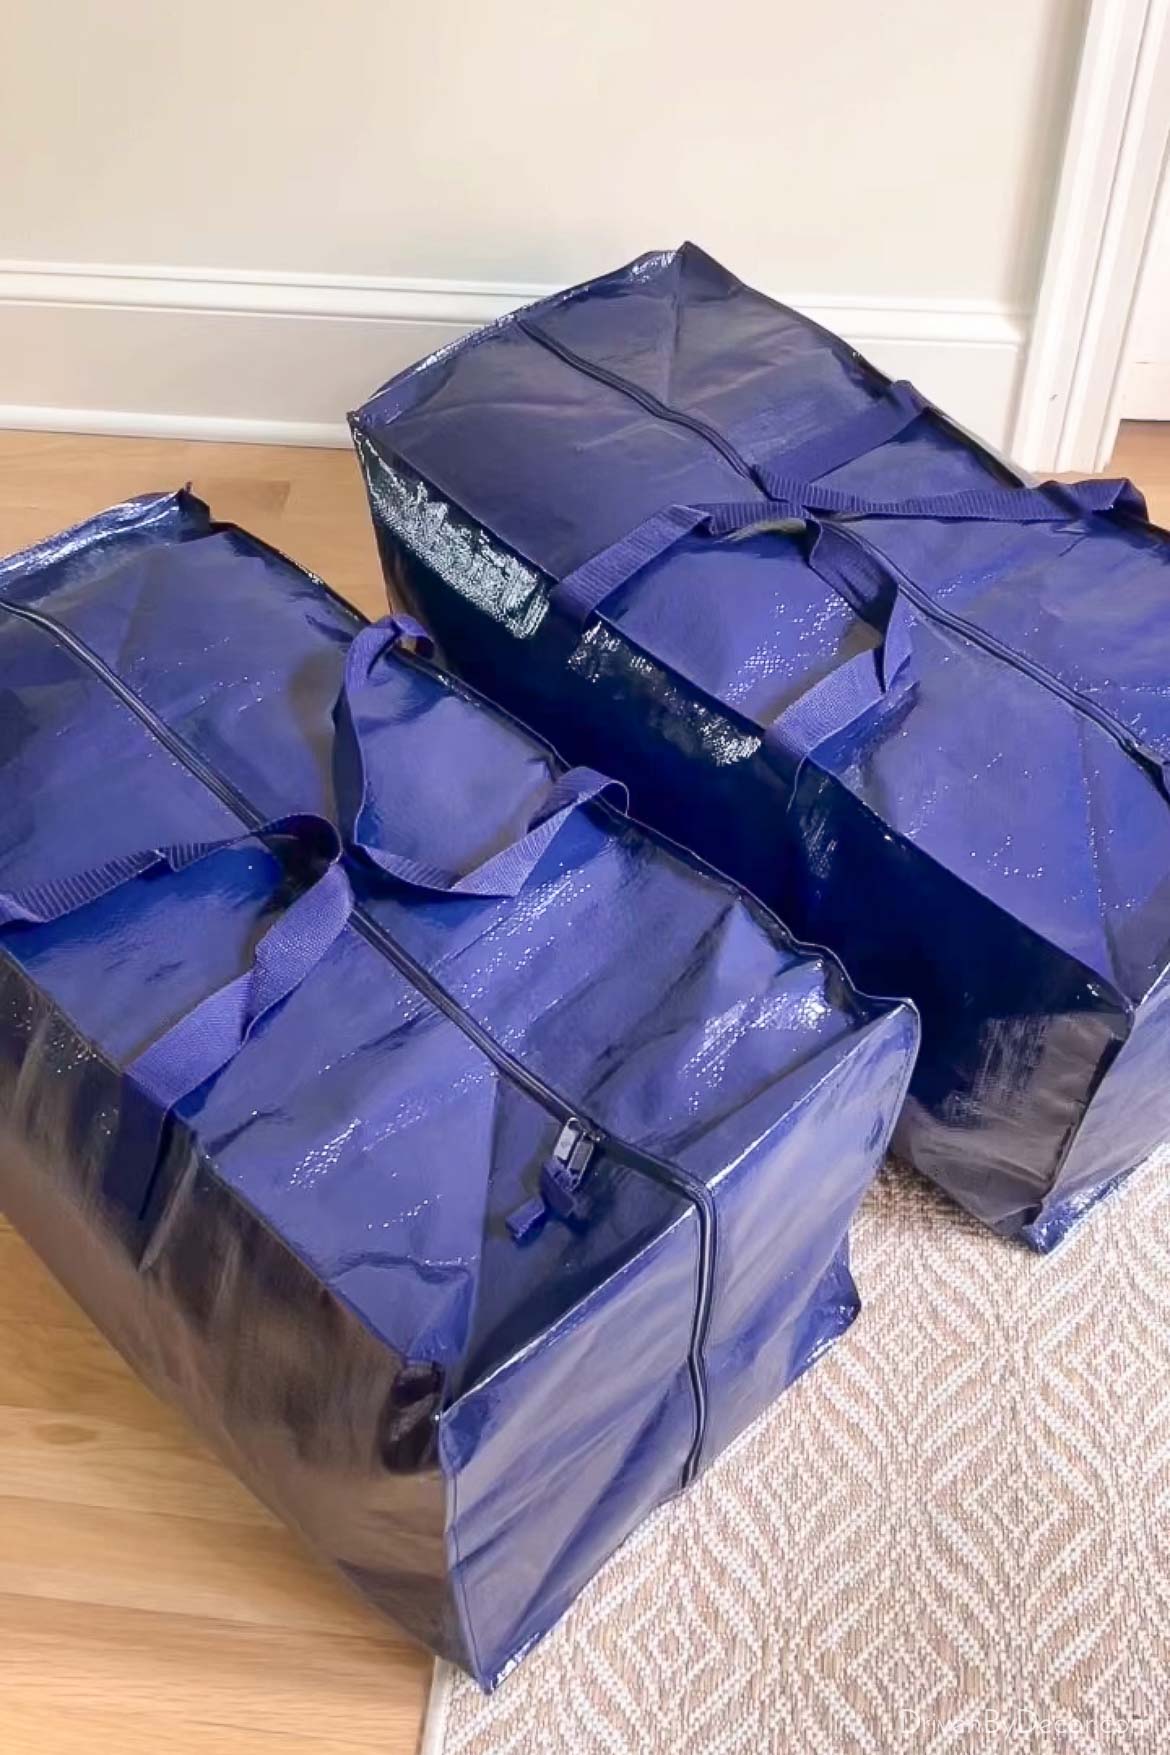 The best moving bags for college!